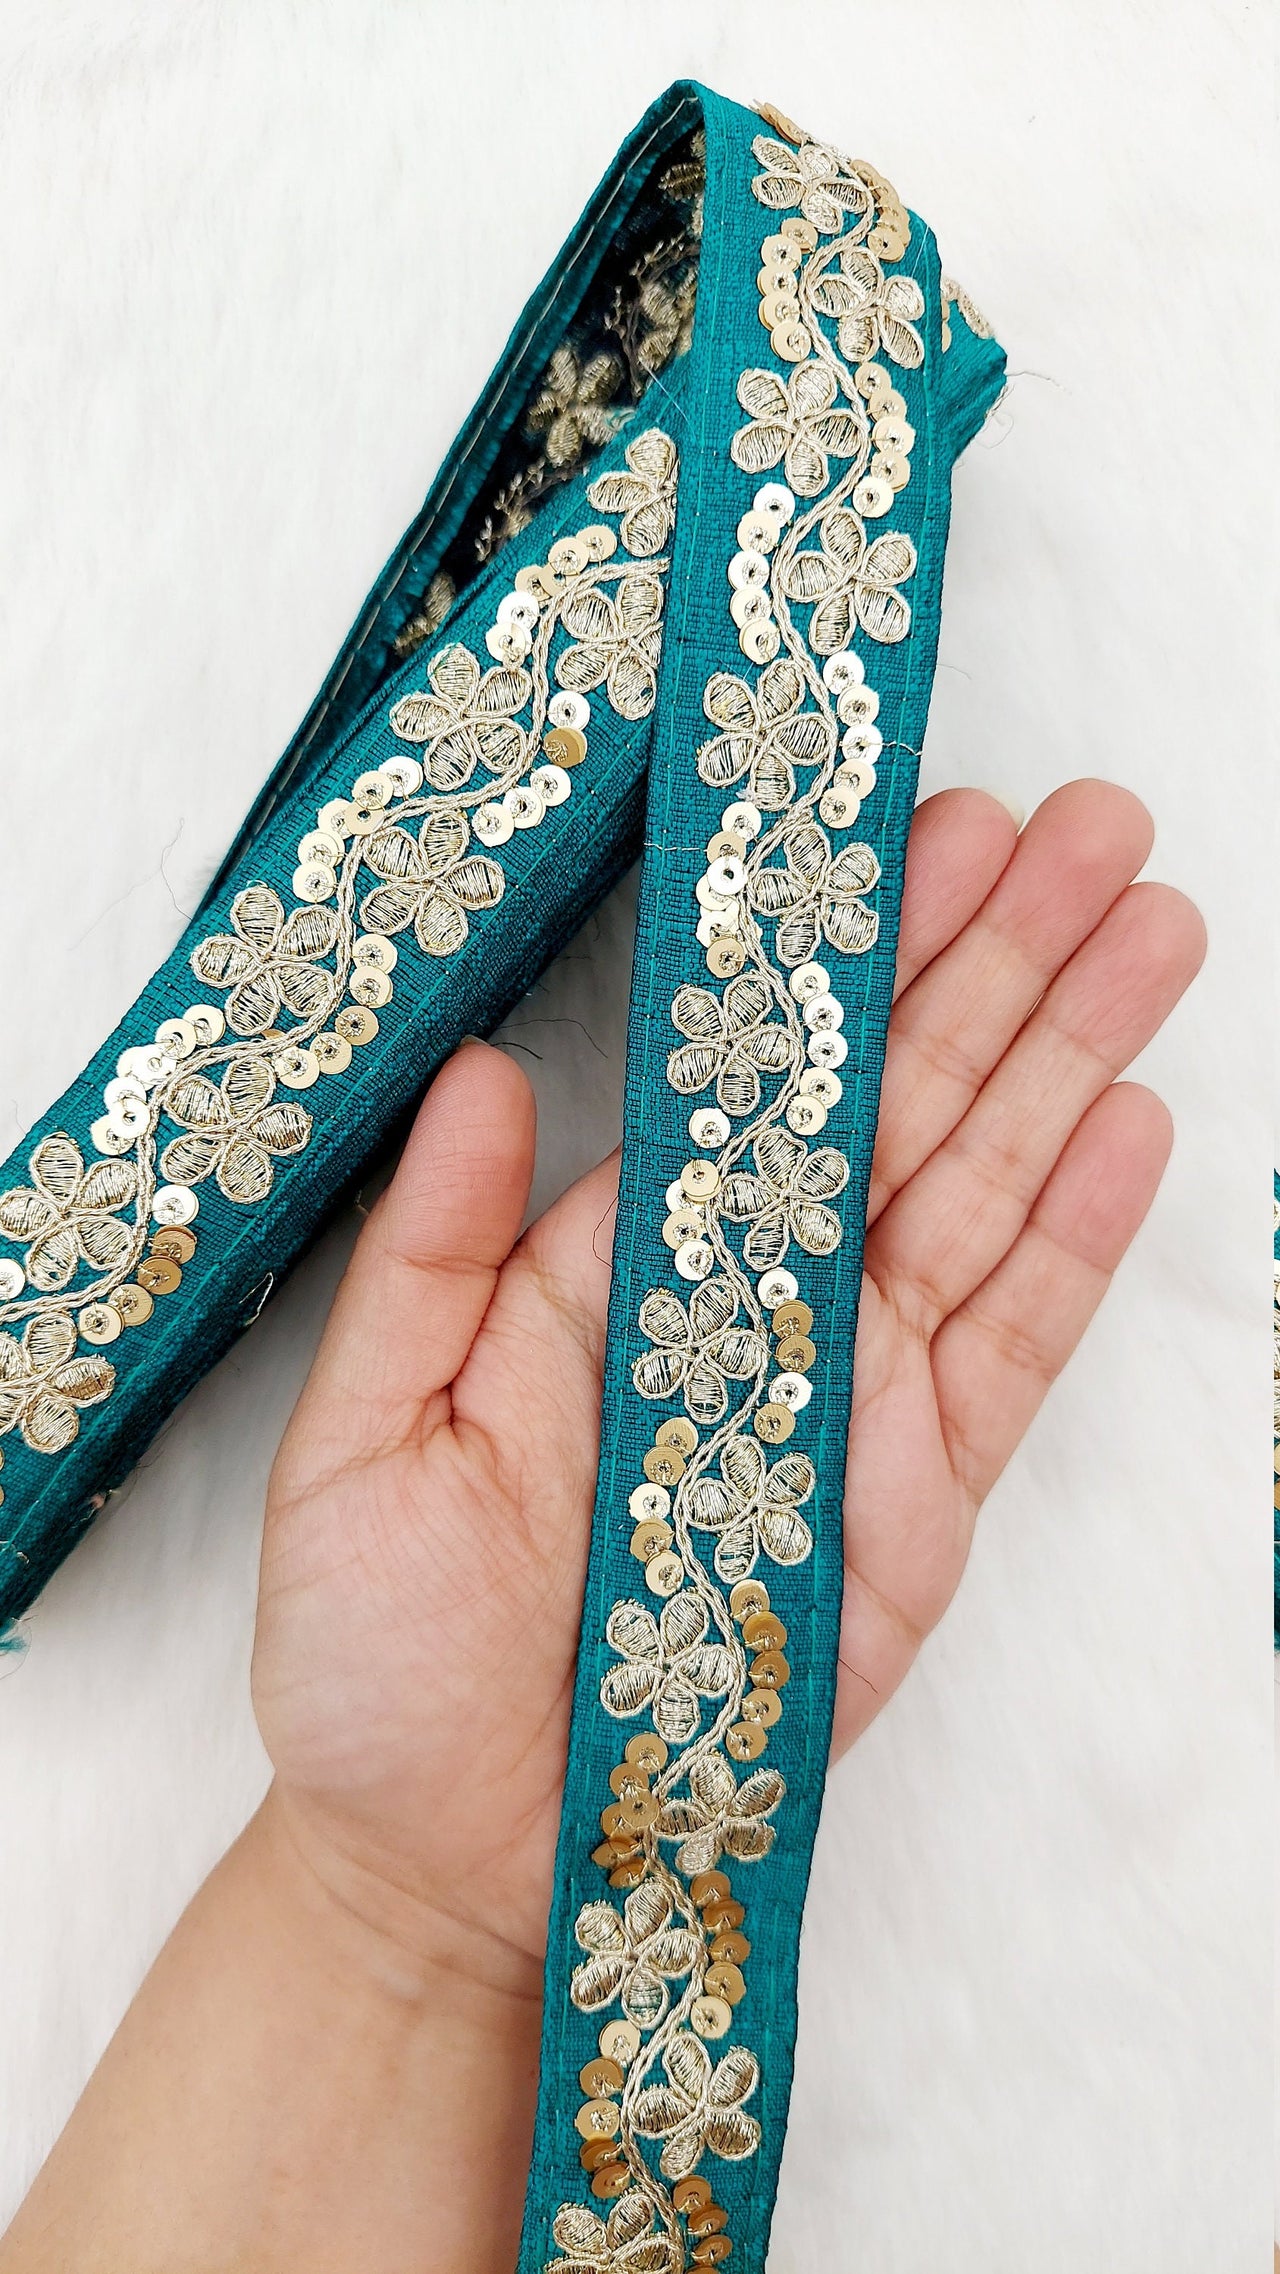 Art Silk Fabric Trim With Gold Floral Embroidery, Floral Sequins Sari Border, Trim By 3 Yards